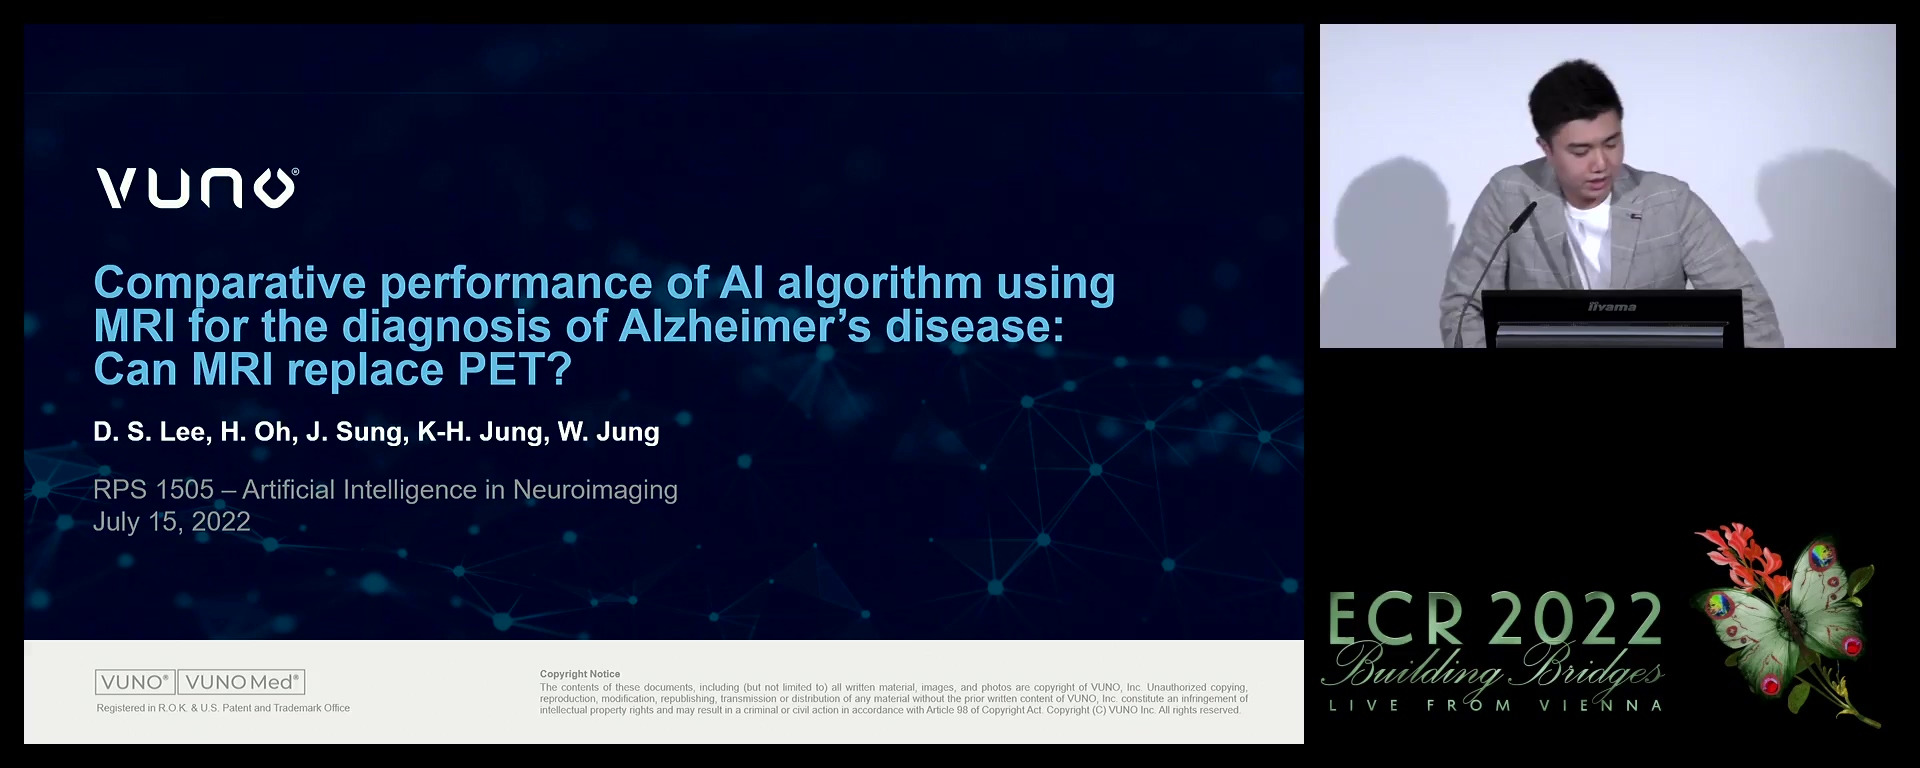 Comparative performance of AI algorithm using MRI for the diagnosis of Alzheimer’s disease: can MRI replace PET? - Wooseok Jung, Seoul / KR